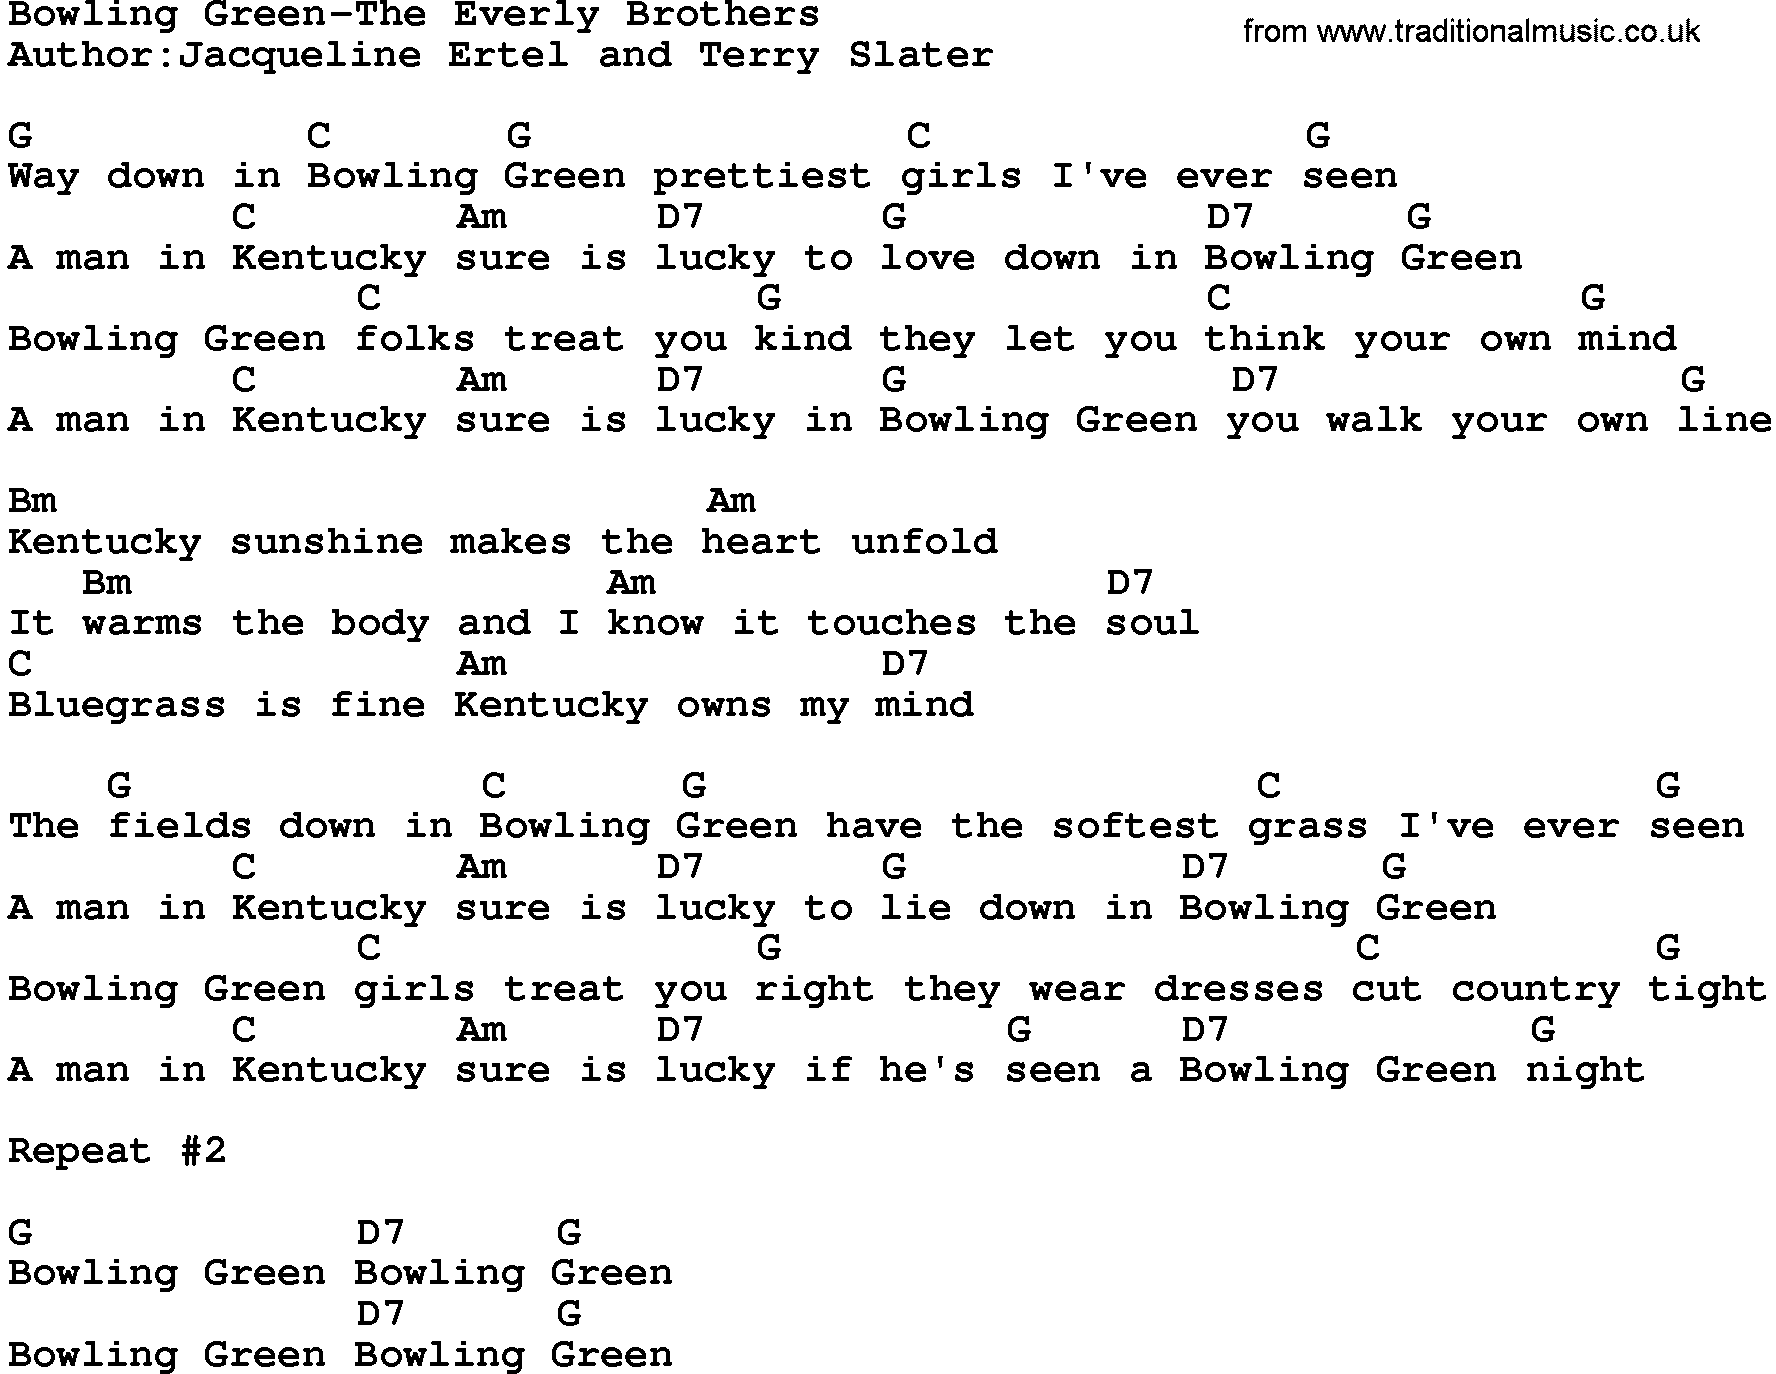 Country music song: Bowling Green-The Everly Brothers lyrics and chords